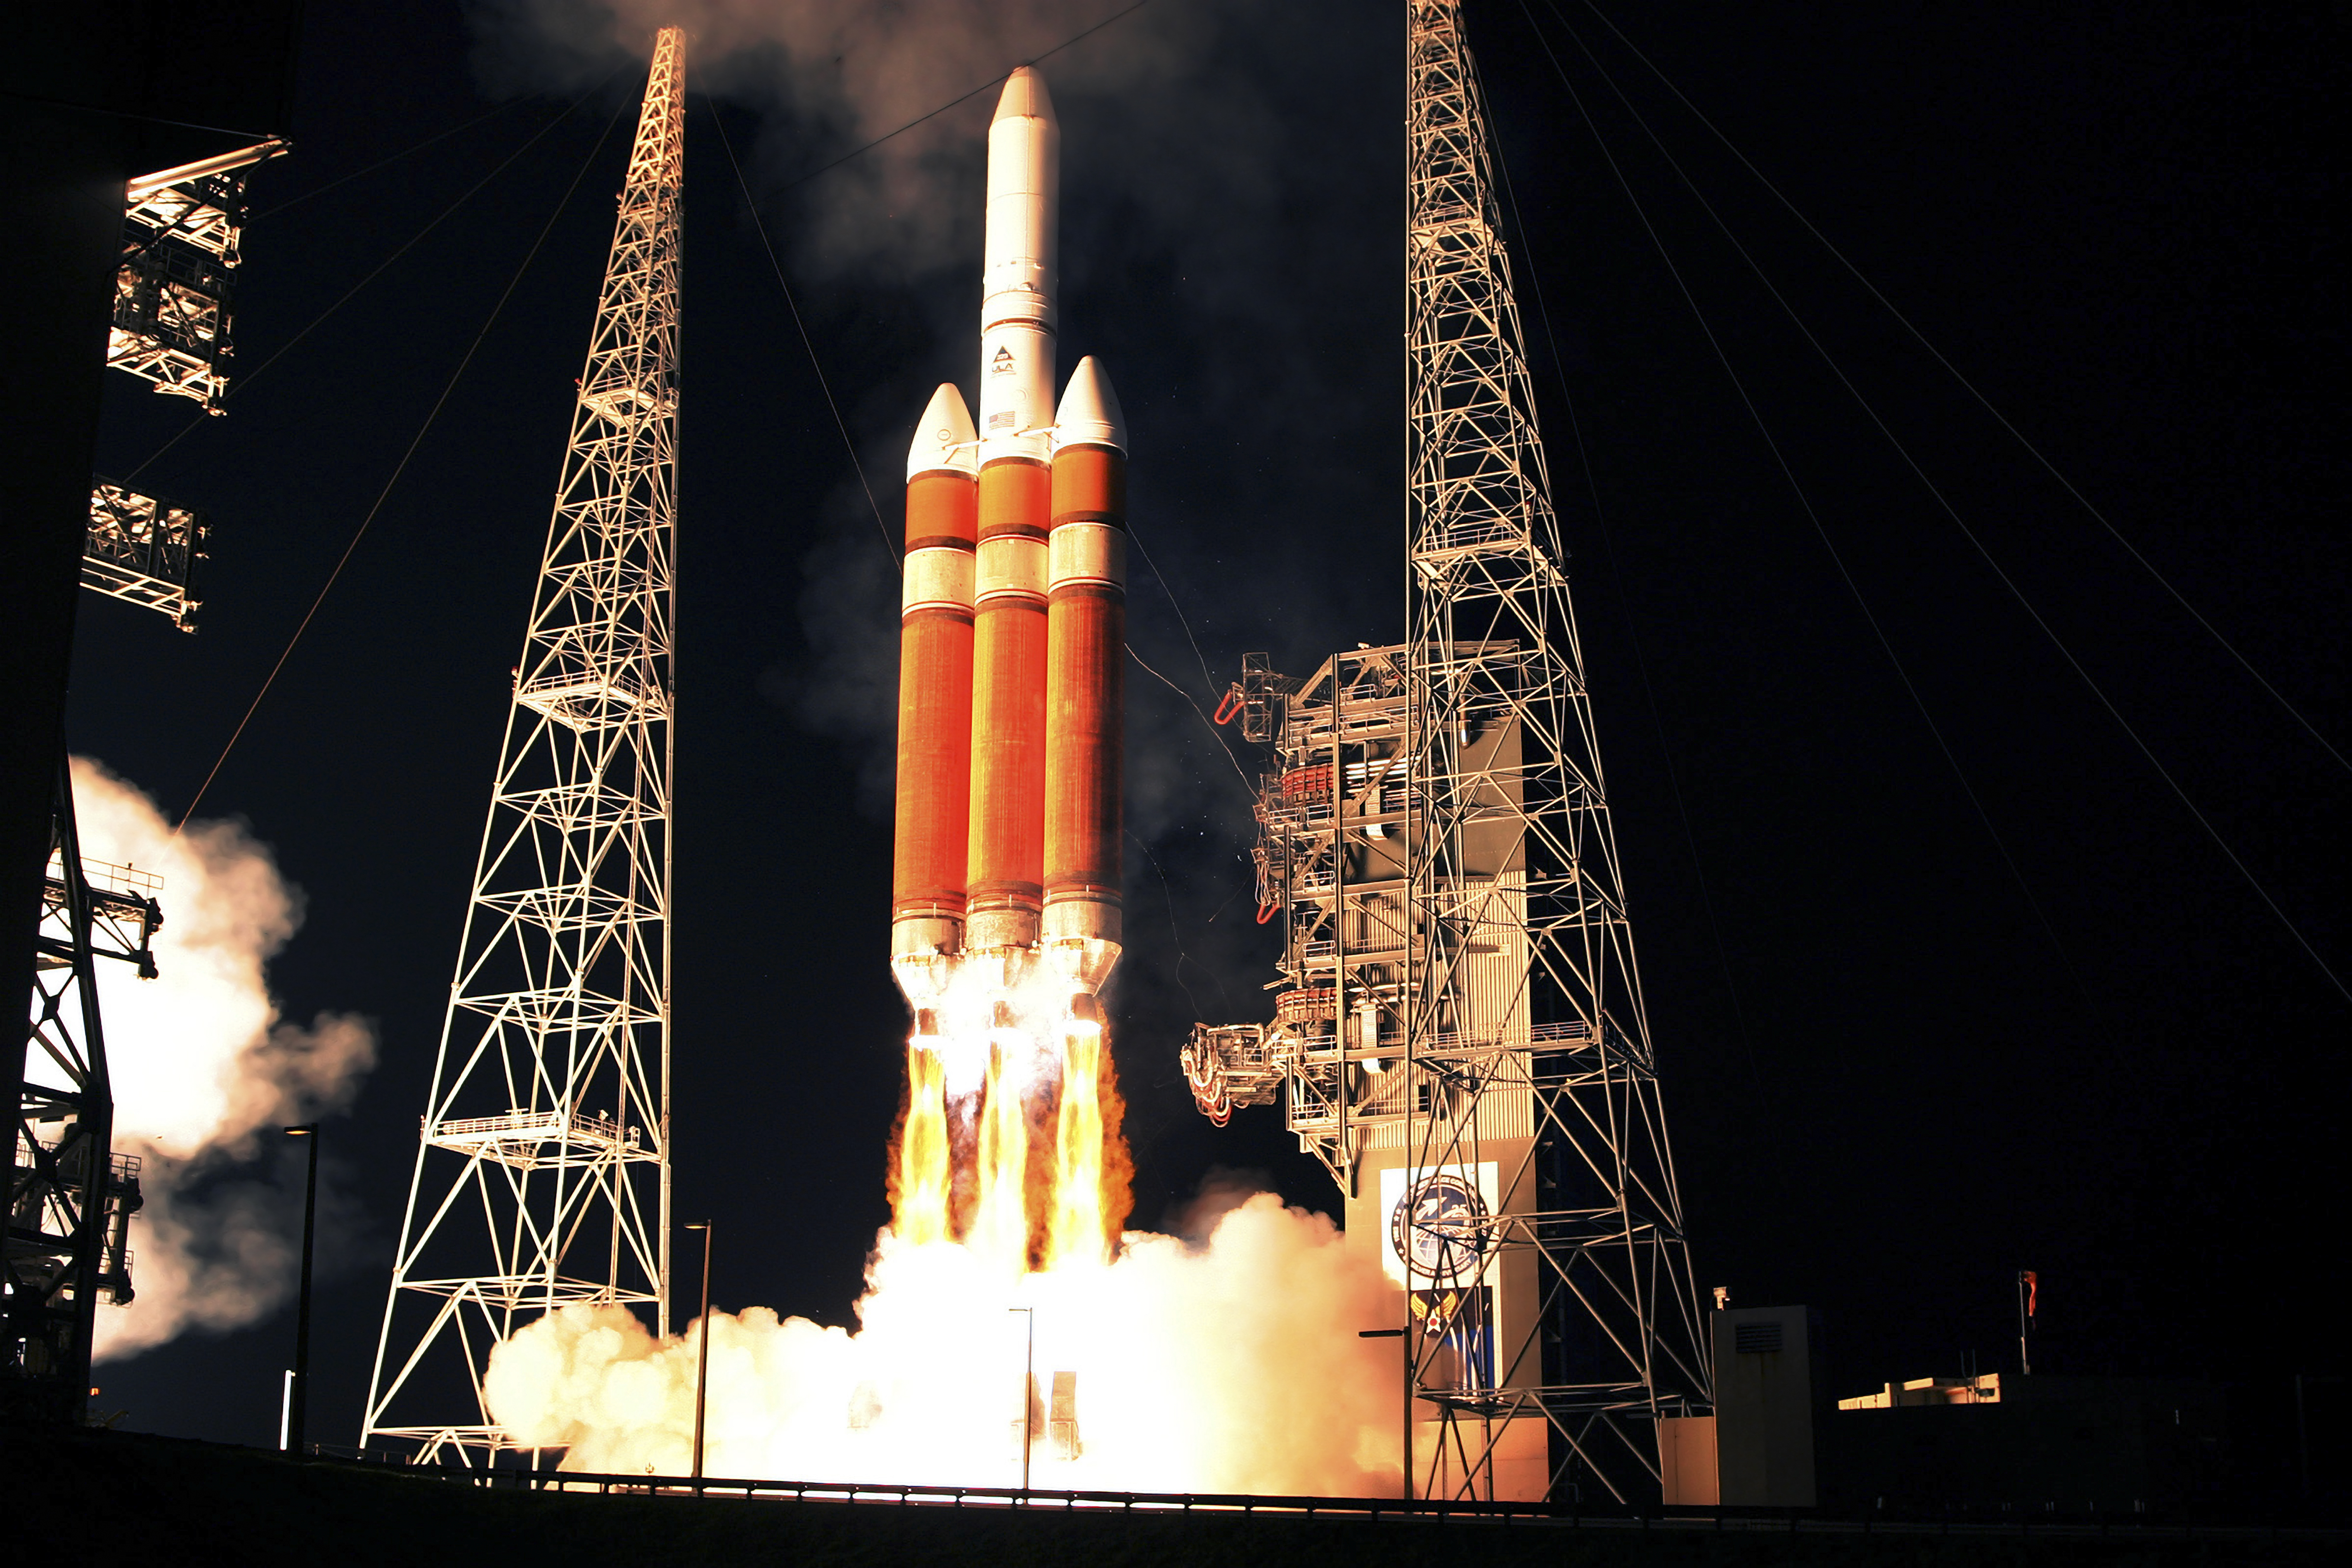 A Delta IV Heavy rocket lifts off late in the evening